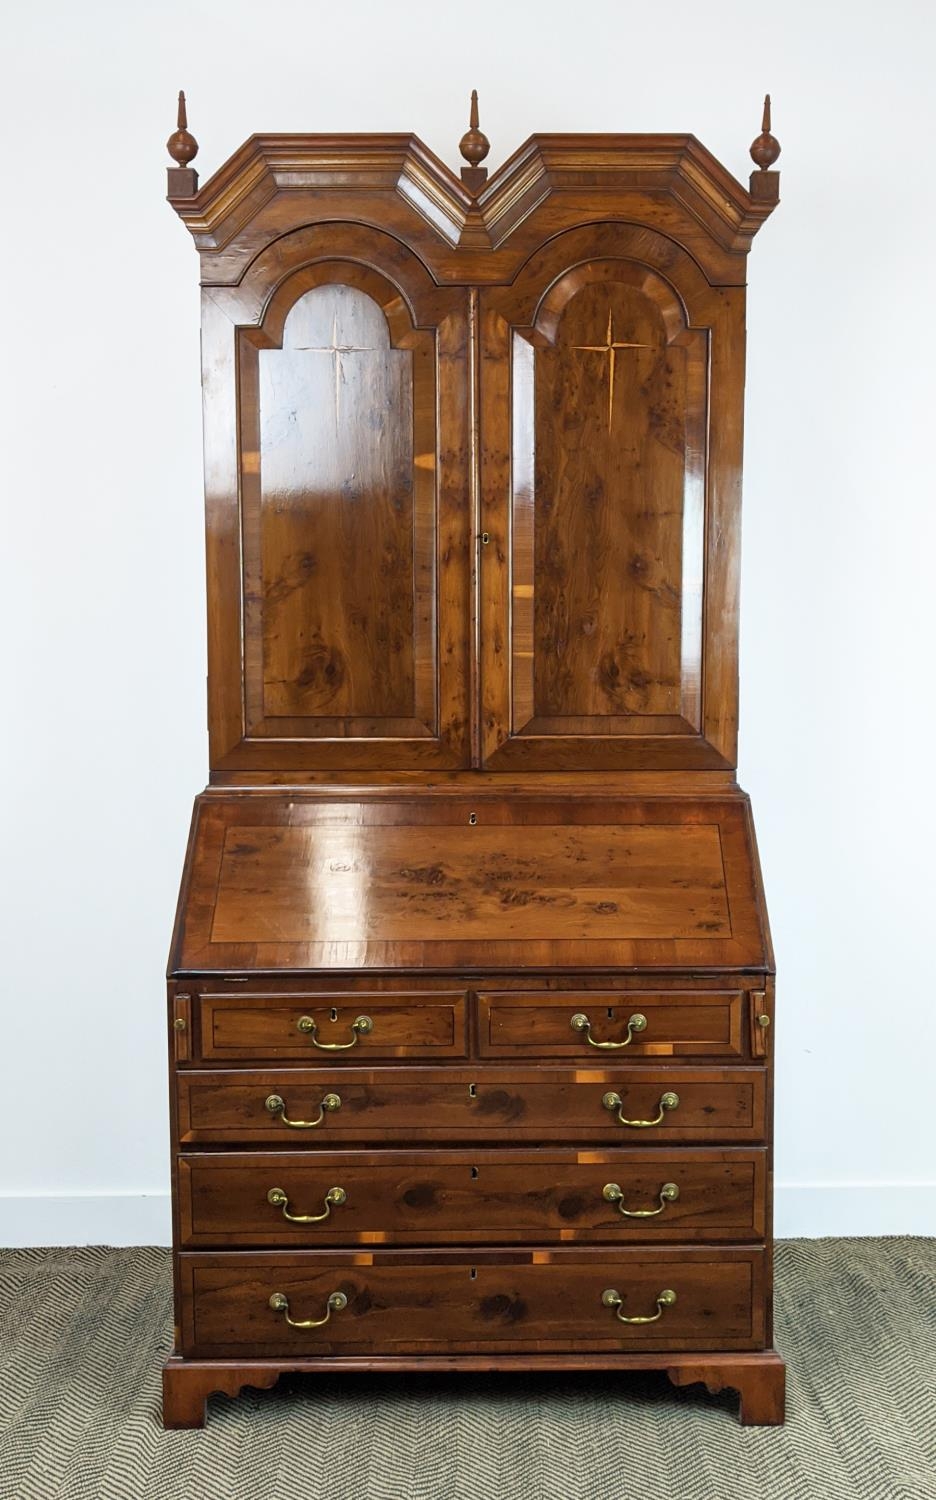 BUREAU CABINET, George II style yewwood and stellar inlaid with three finials over panelled doors